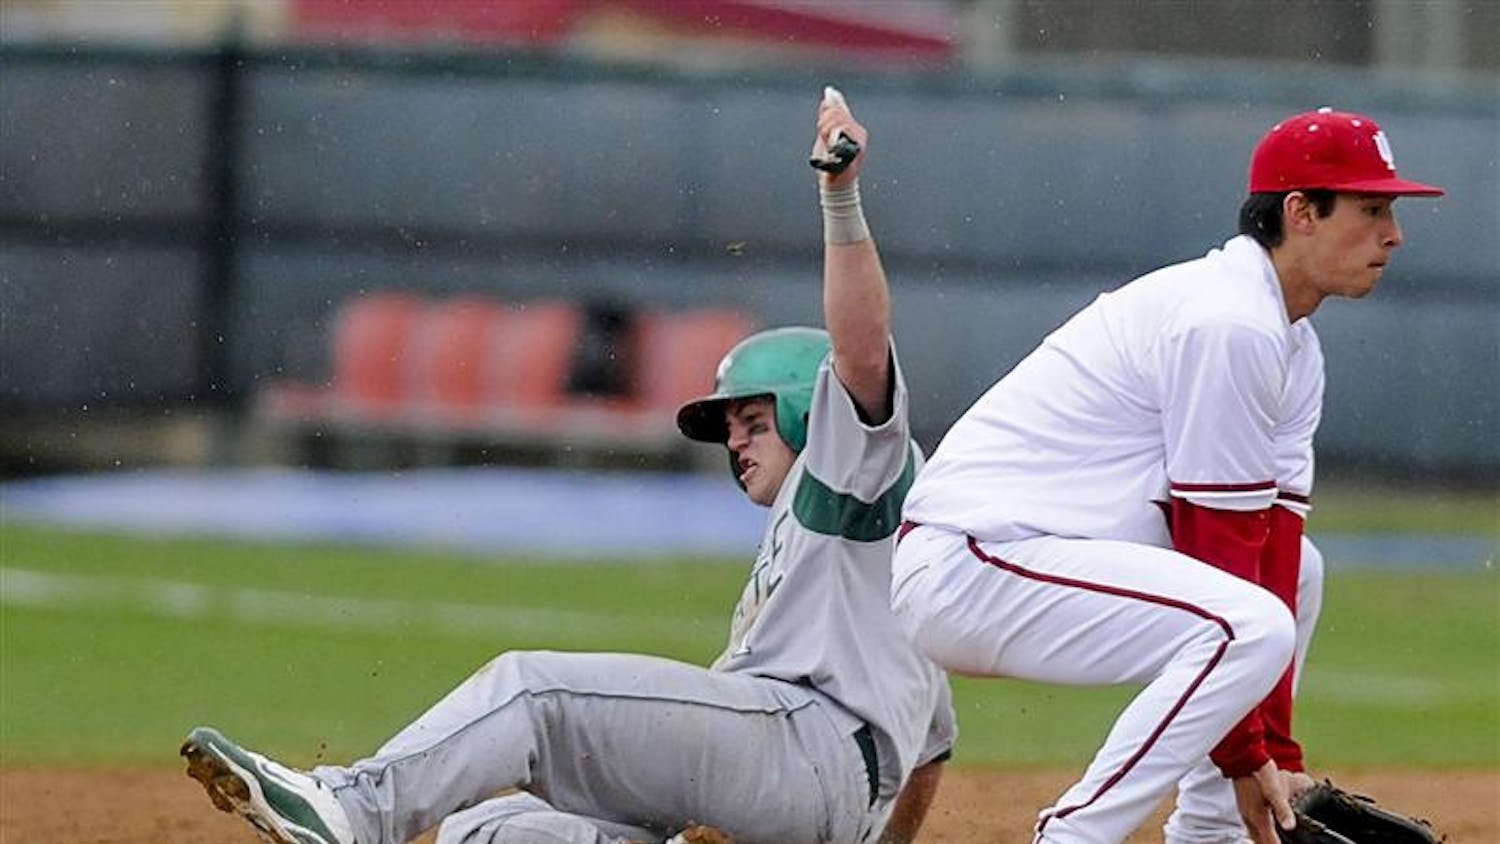 Chicago State's Albert Carpen slides into second in front of junior infielder Jake Dunning on March 31 at Sembower Field. The Hoosiers face Louisville at 4 p.m. today on the road.